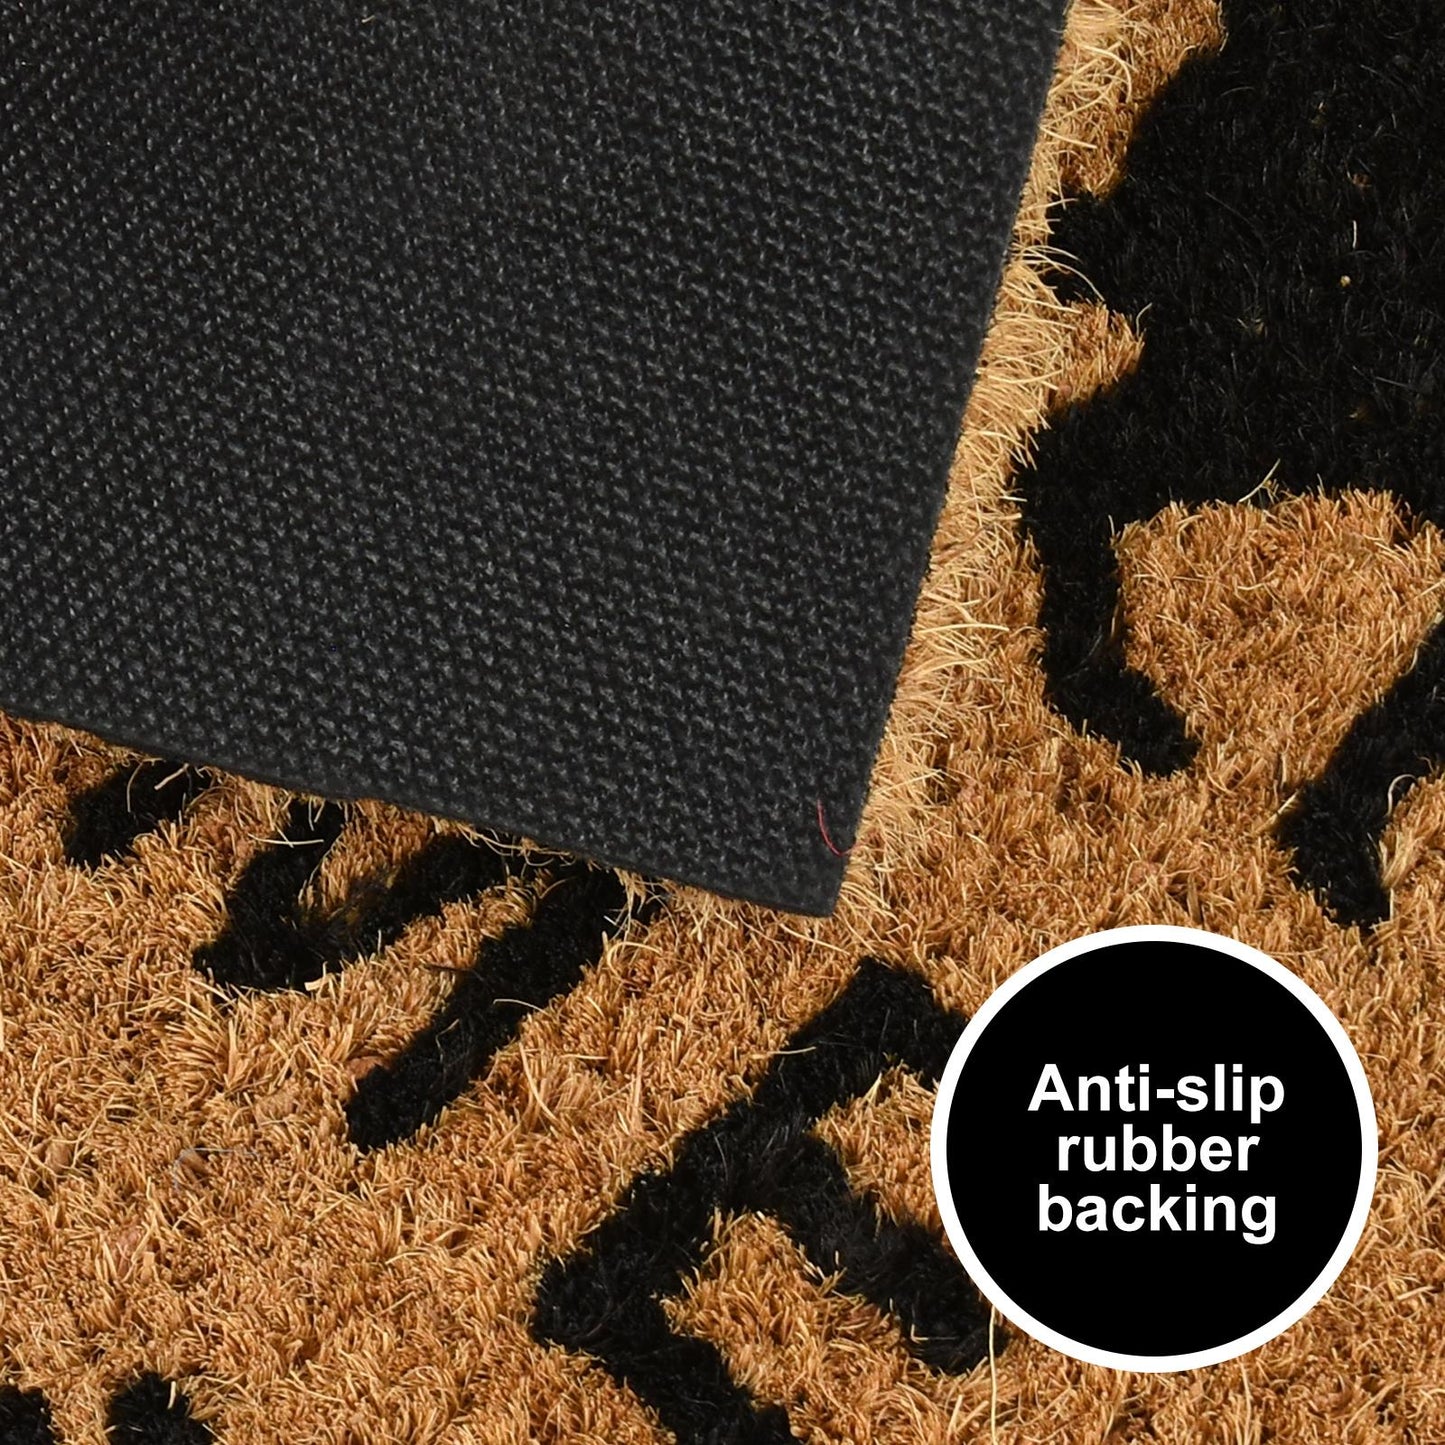 Spooky And Charming Doormat With Black Cat Silhouette And Welcome Message